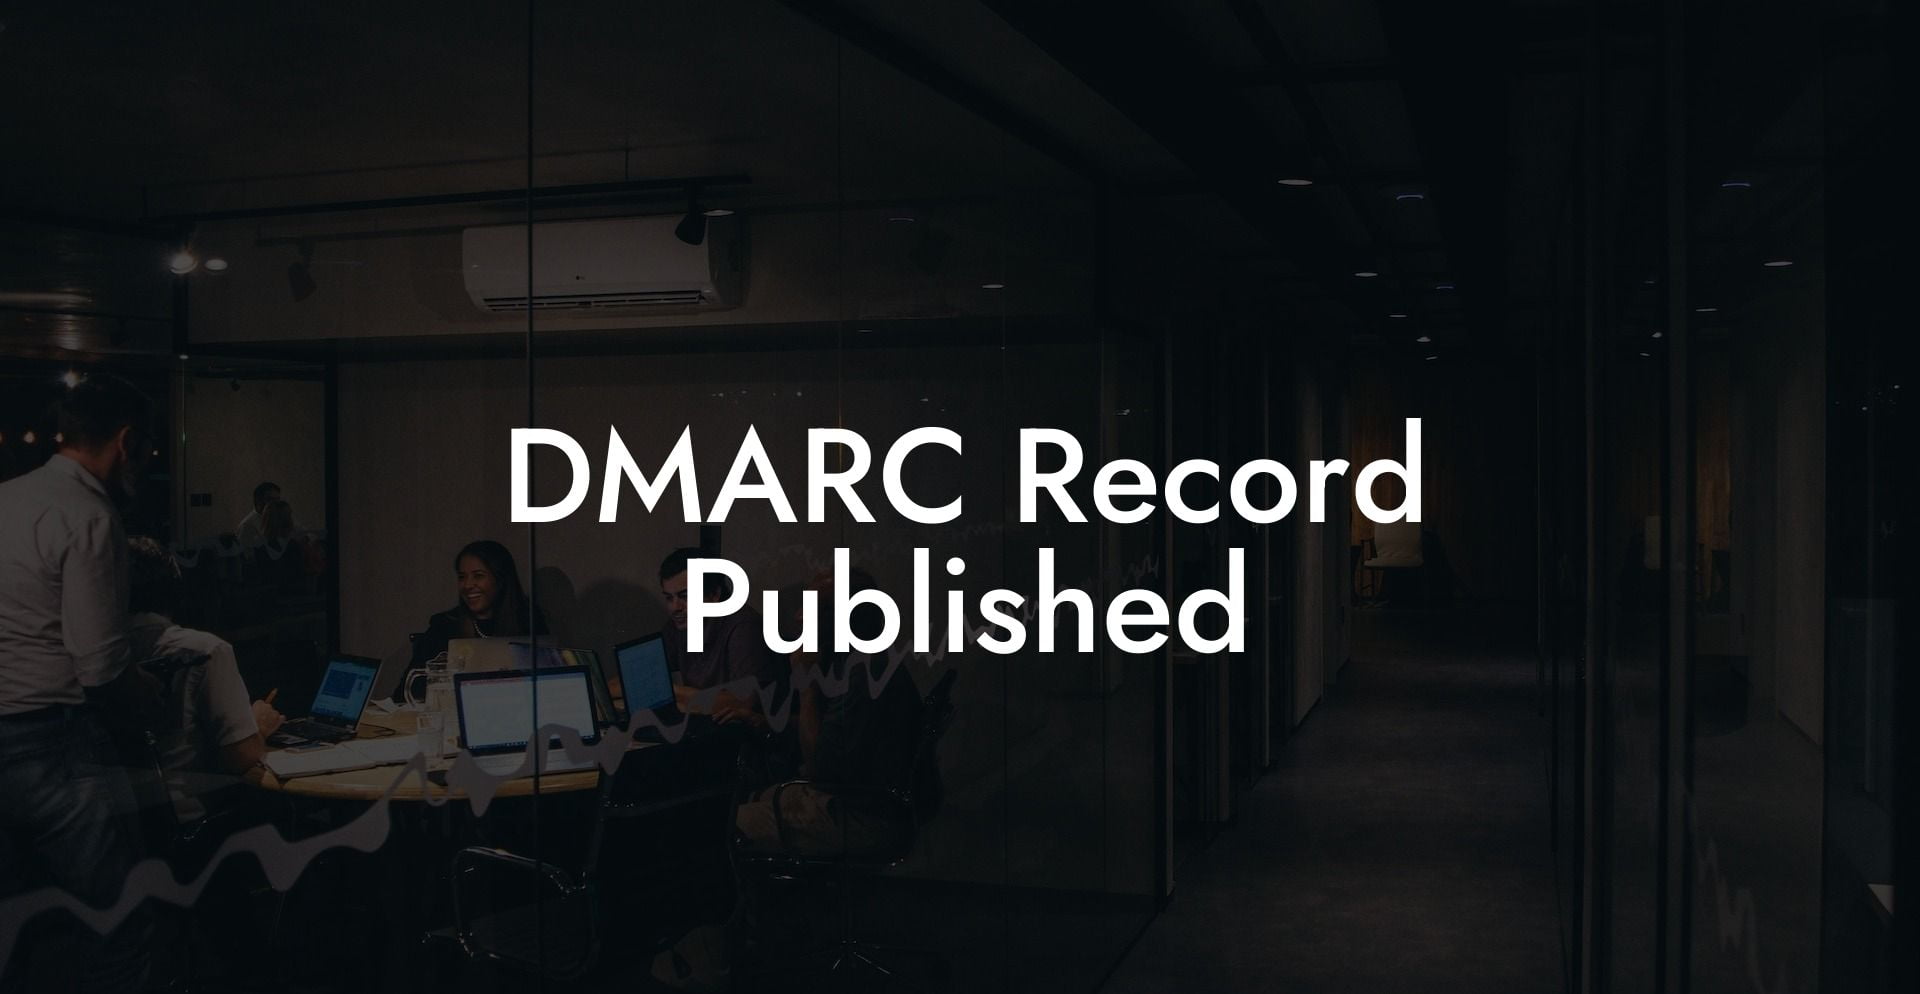 DMARC Record Published